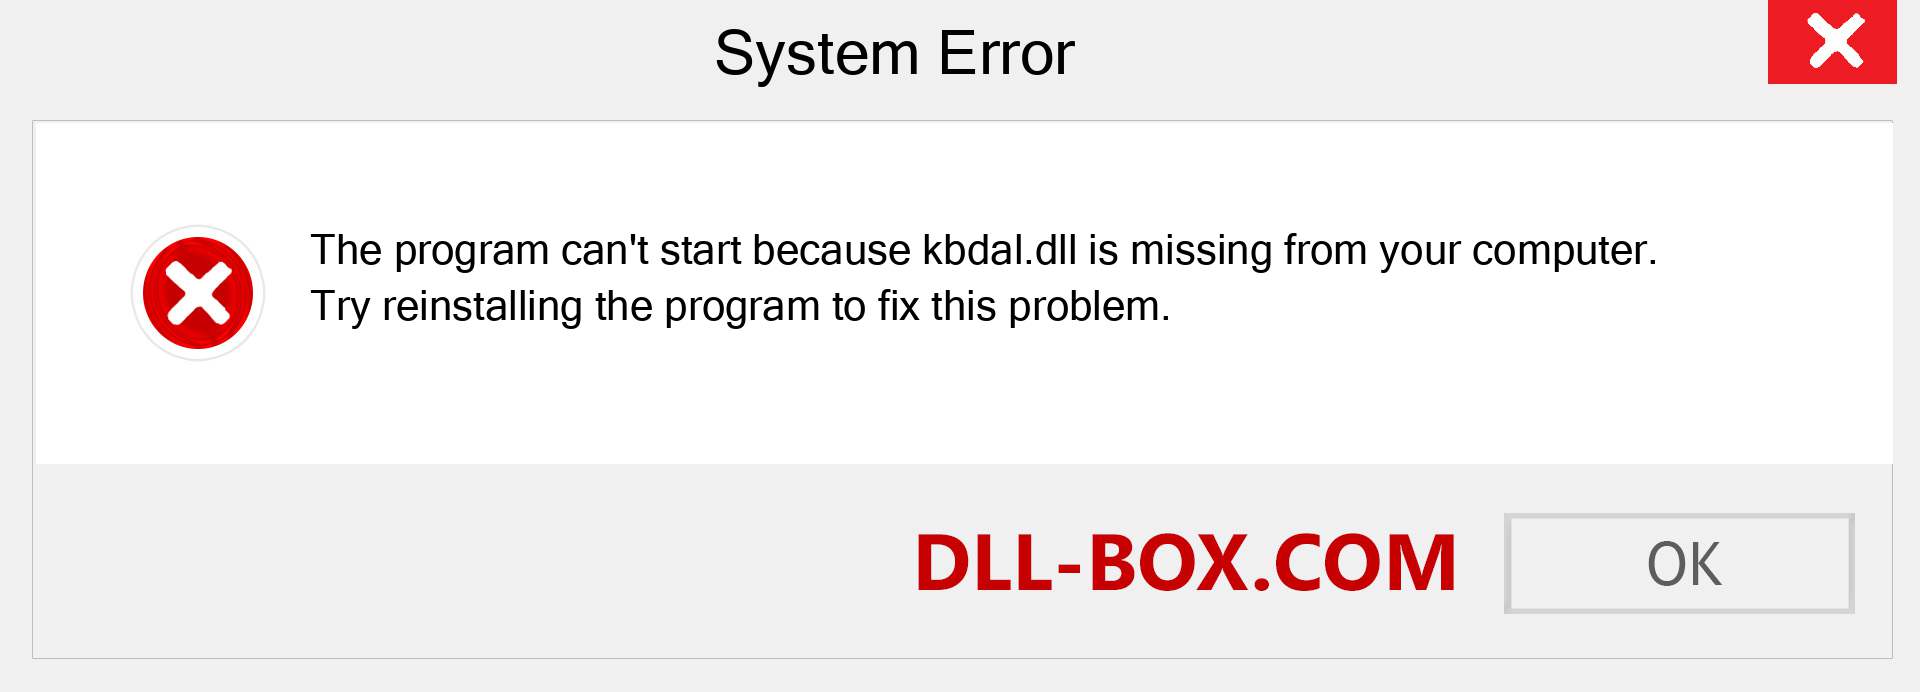  kbdal.dll file is missing?. Download for Windows 7, 8, 10 - Fix  kbdal dll Missing Error on Windows, photos, images